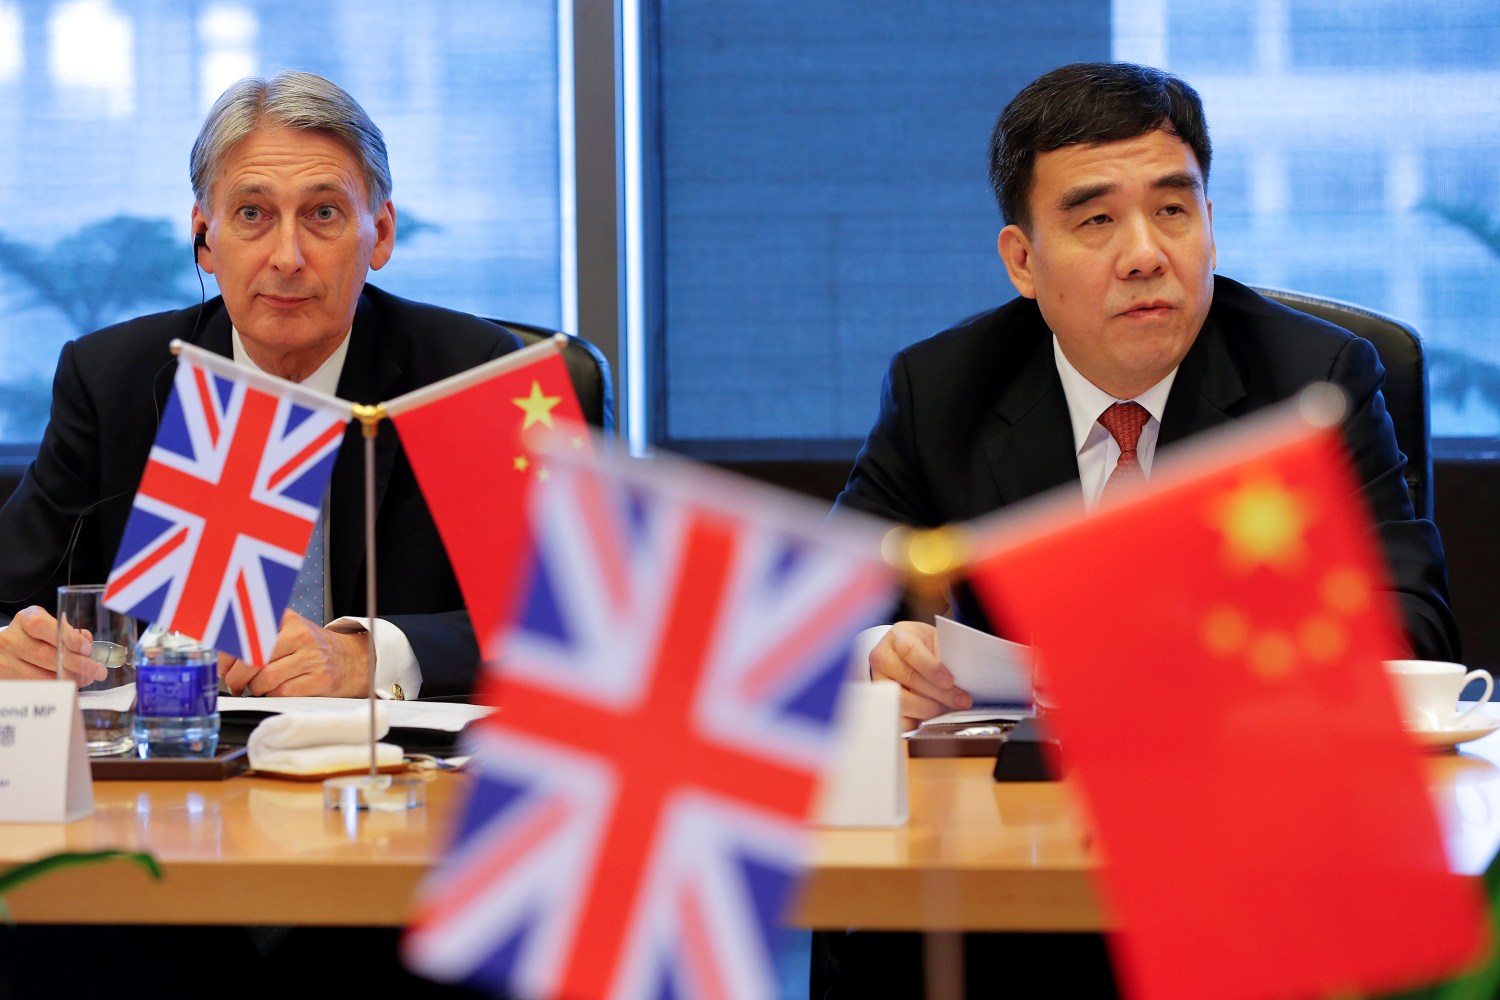 Britain's Chancellor of the Exchequer, Philip Hammond (L) and Bank of China Chairman Tian Guoli attend UK-China High Level Financial Services Roundtable at the Bank of China head office building in Beijing, China July 22, 2016. REUTERS/Damir Sagolj